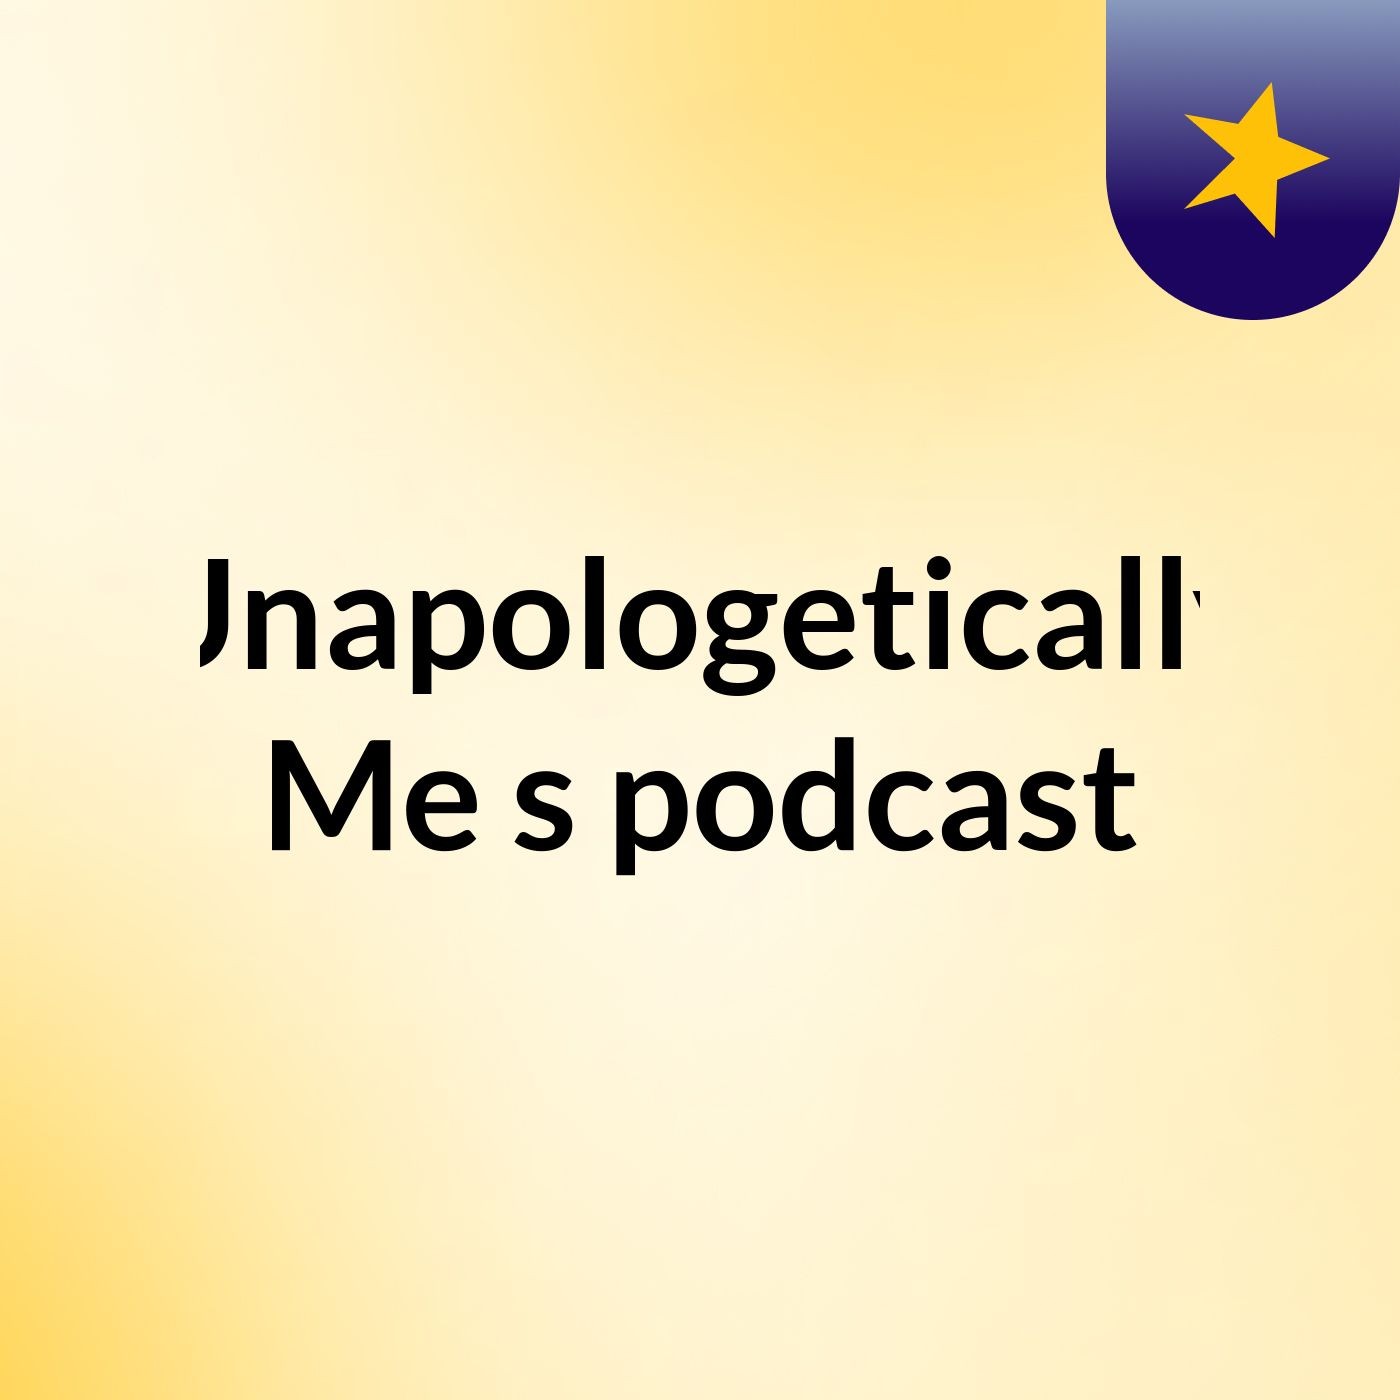 Episode 4 - Unapologetically Me's podcast How Do You Define Love?